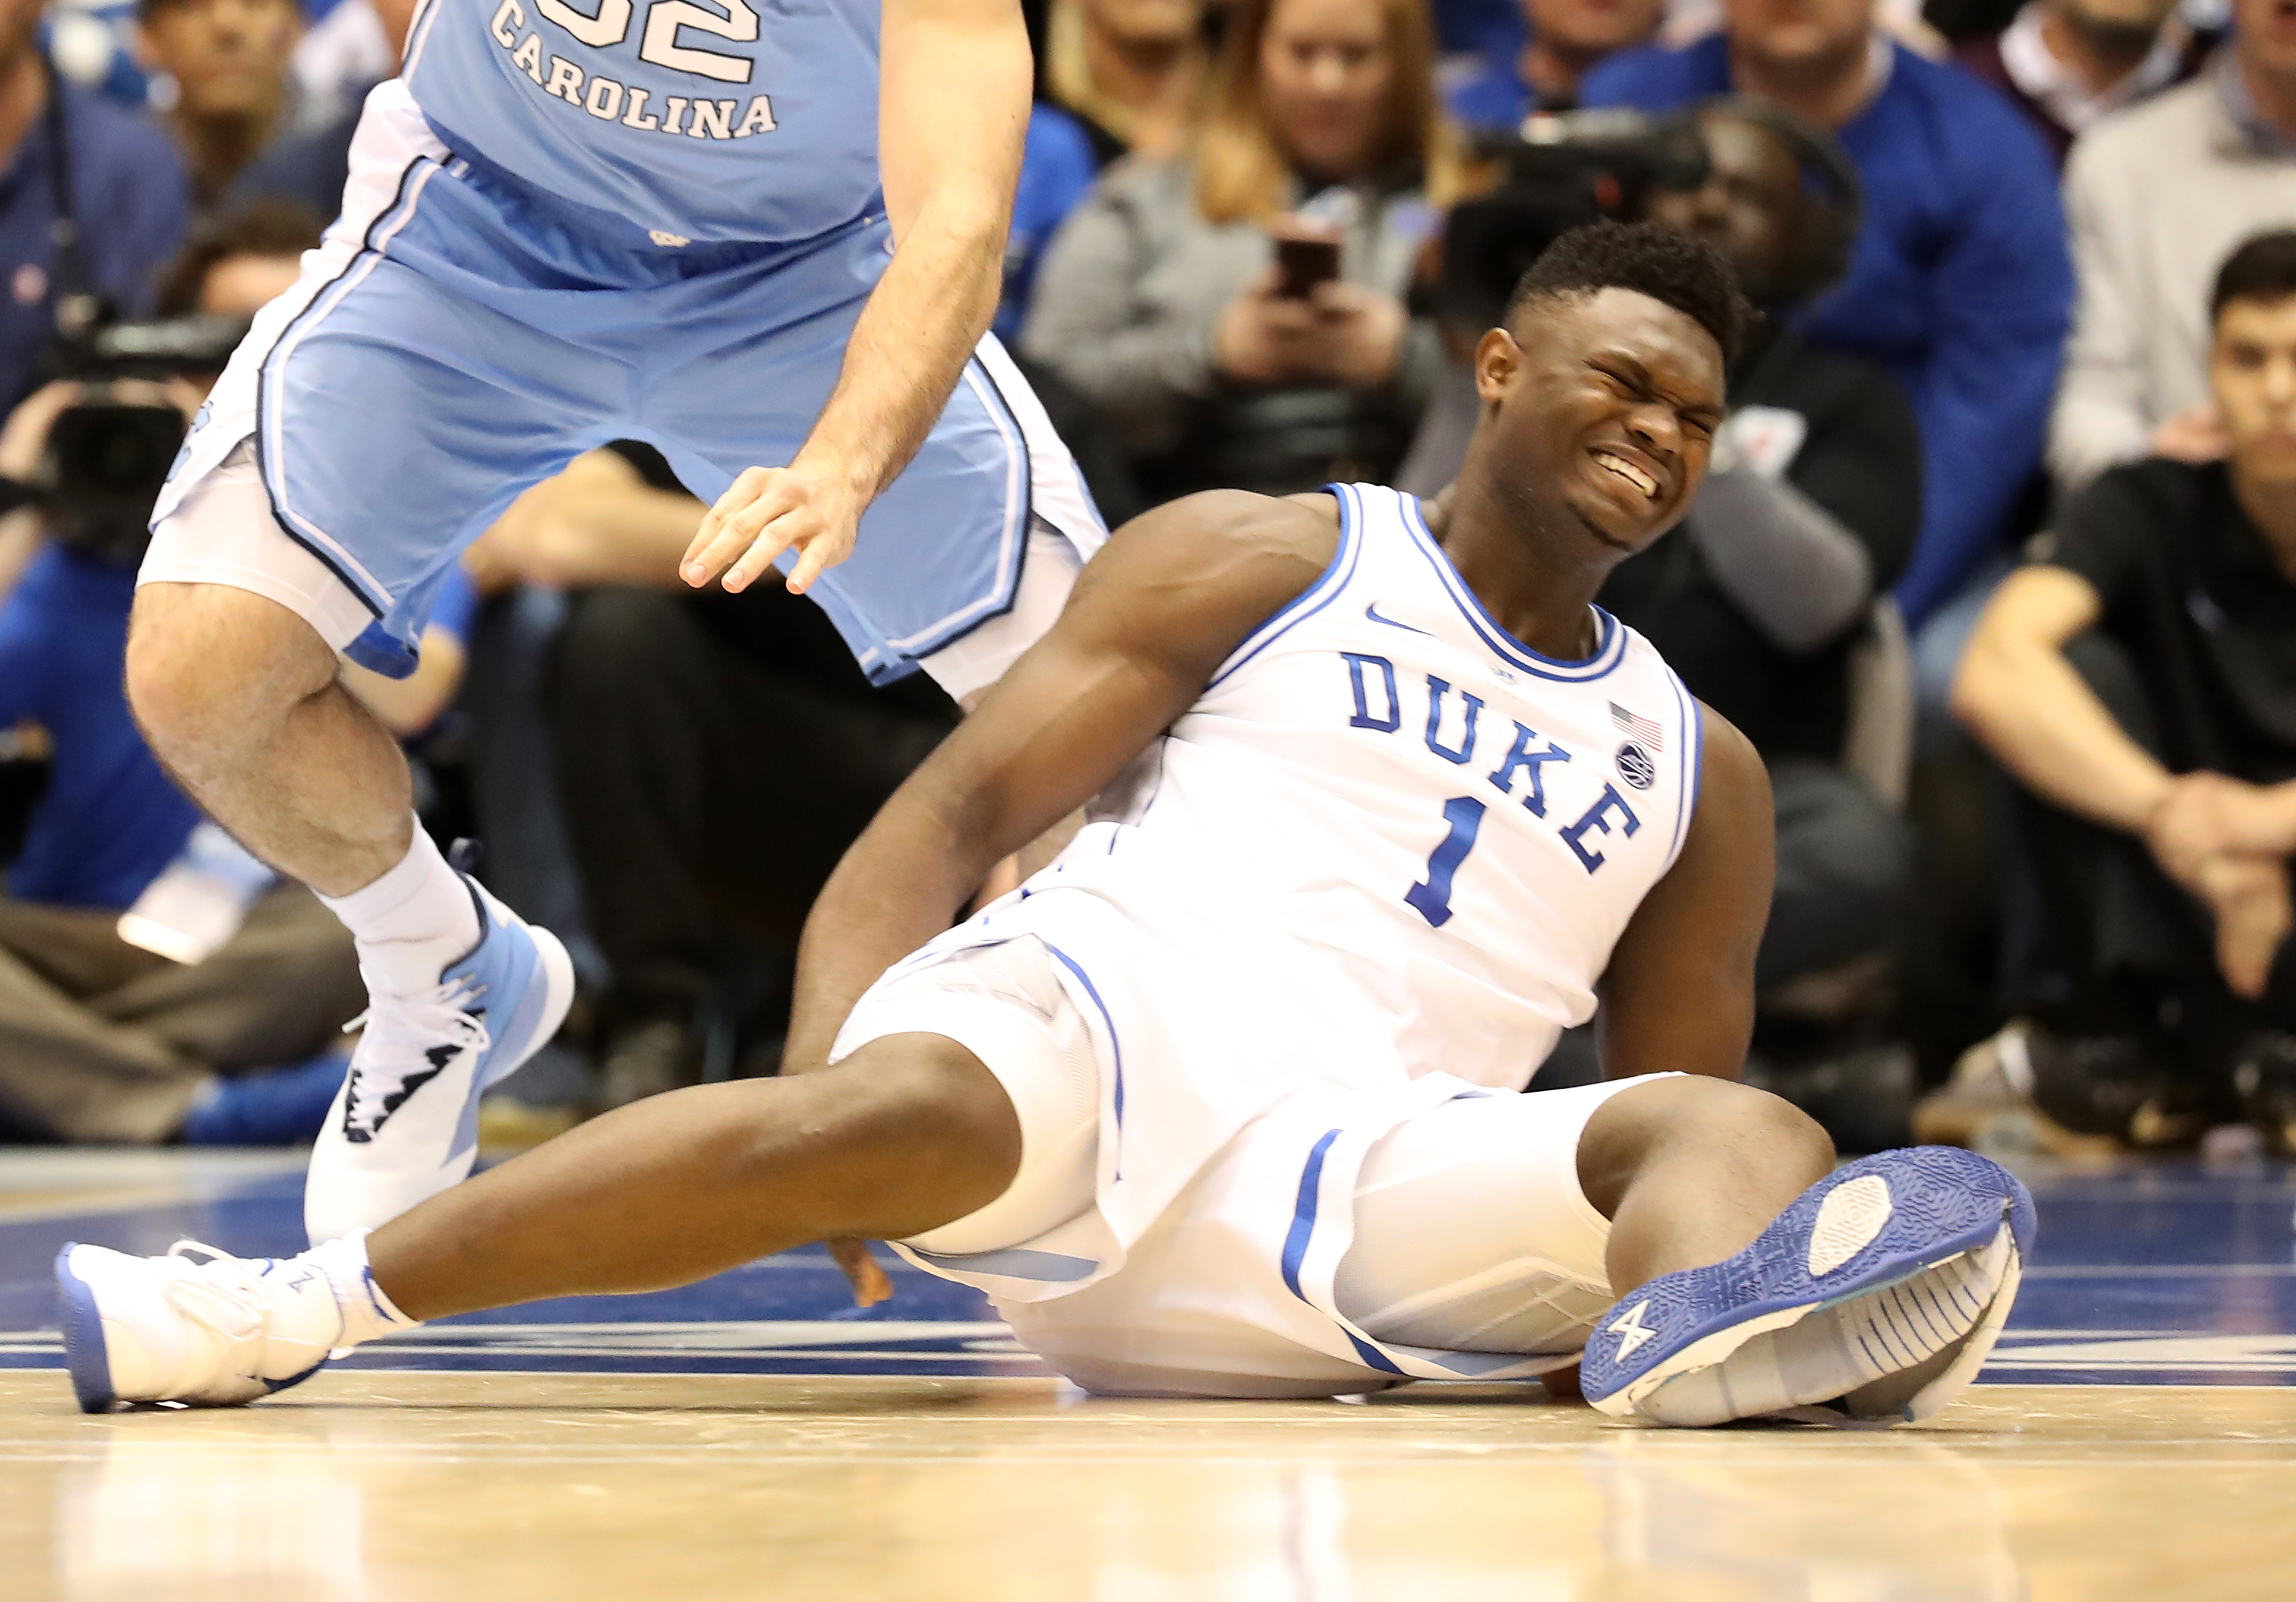 Zion Williamson taking a serious, 'no smiles,' approach as